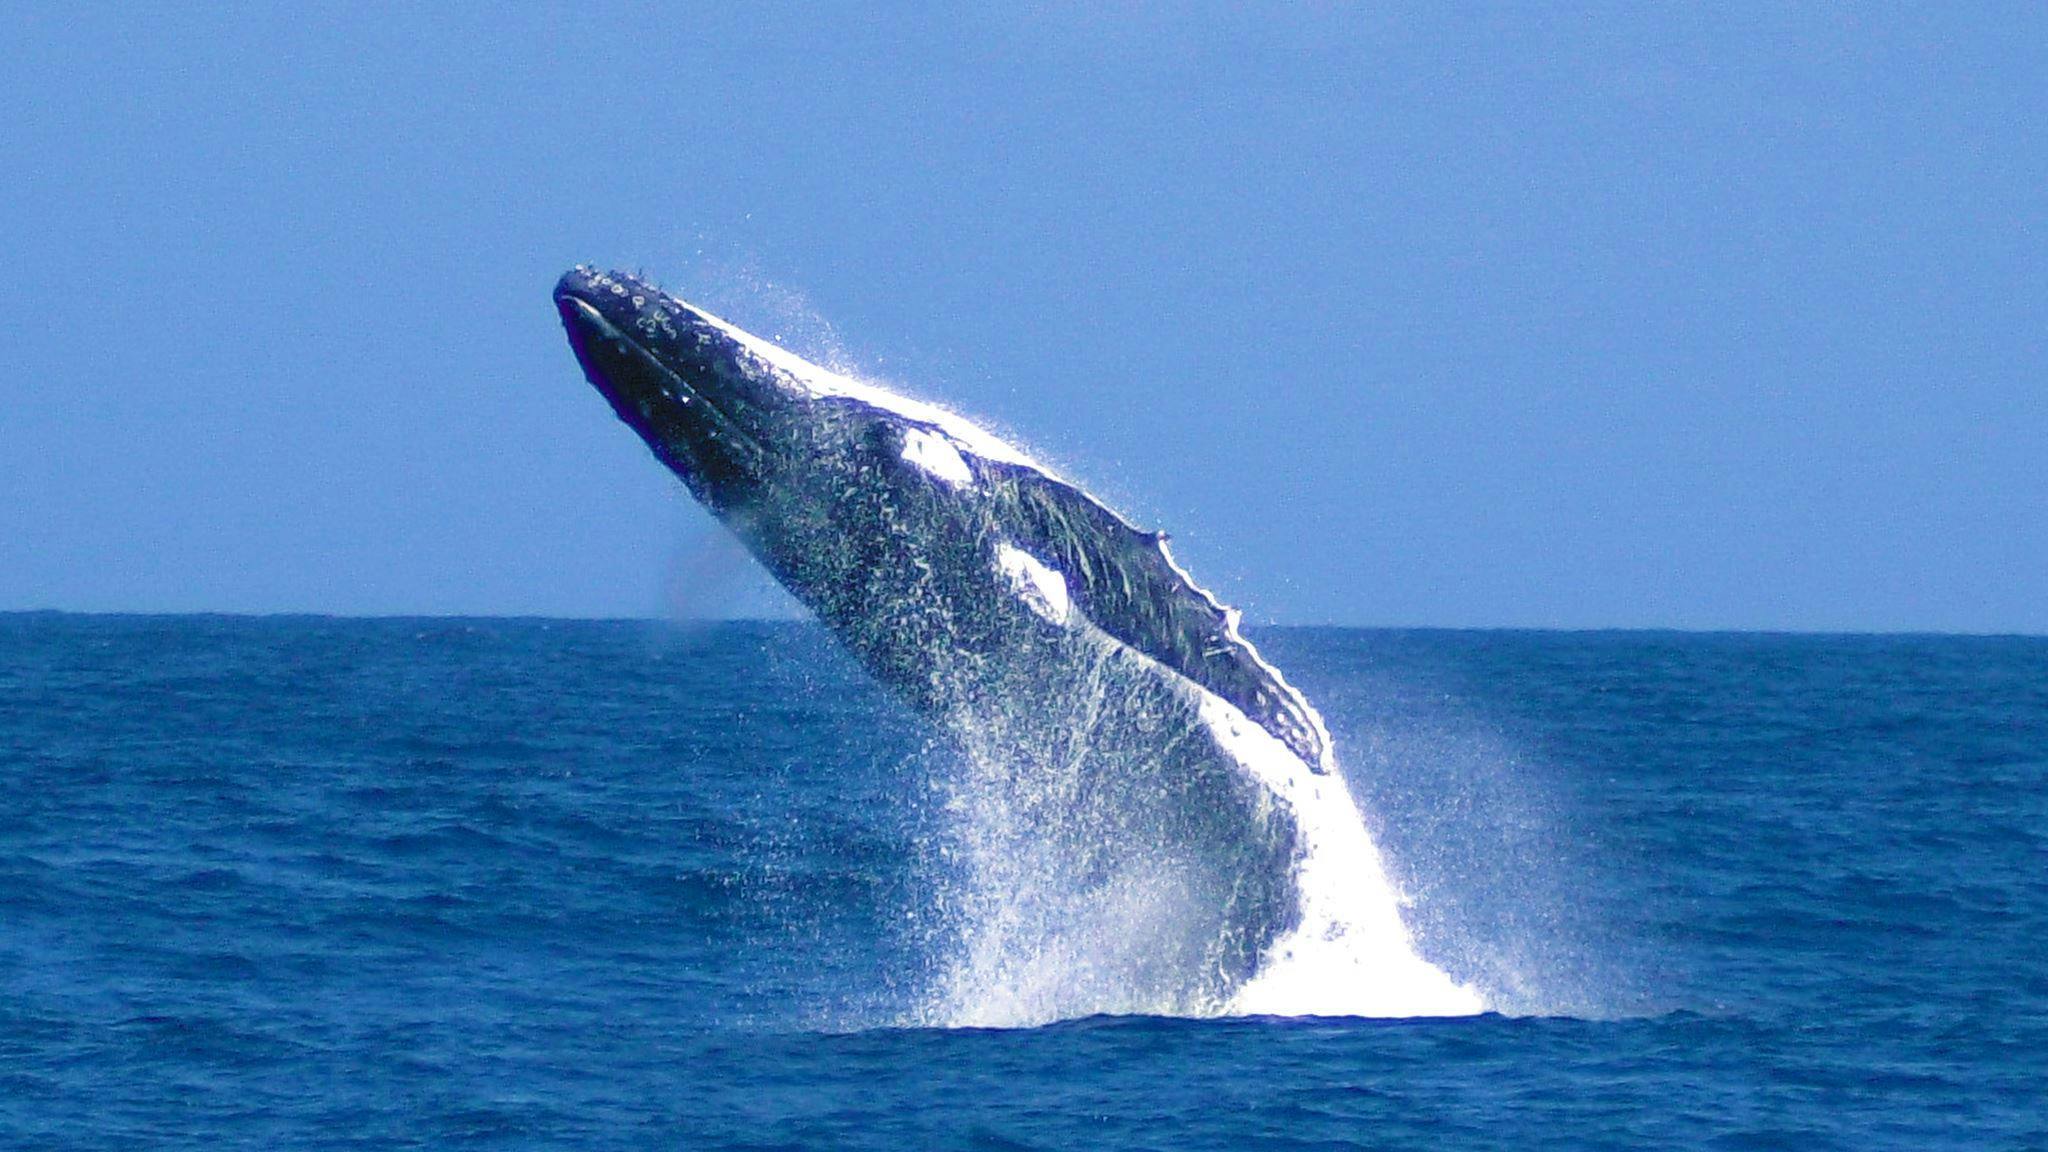 Tangalooma Whale Watching Cruise